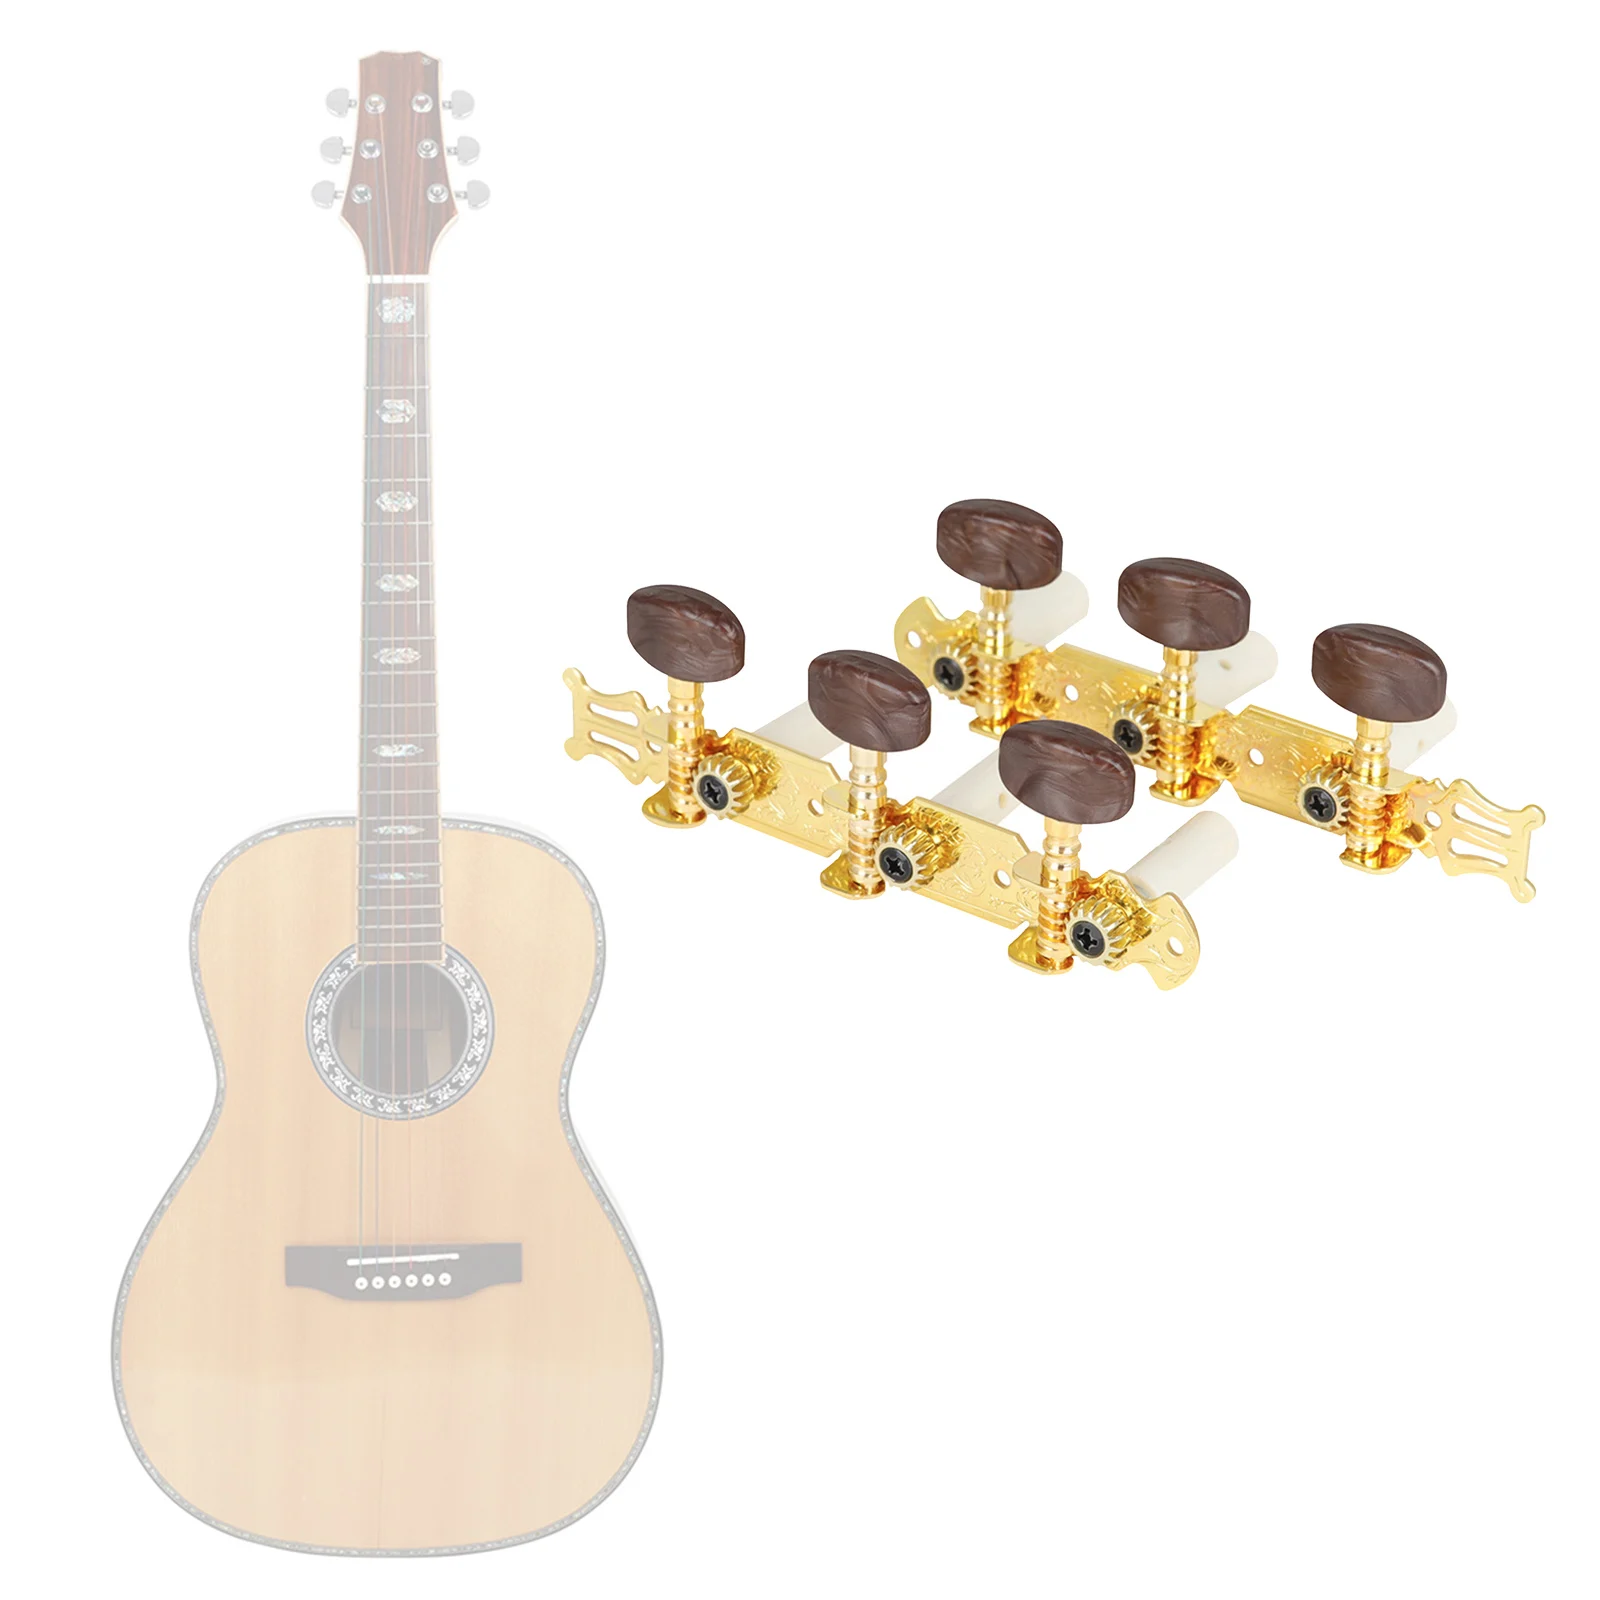 Metal Gold String Tuning Tuners Machine Keys Head 14:1 Left Right 3L3R for Classical Guitar Luthier DIY Accessory Parts